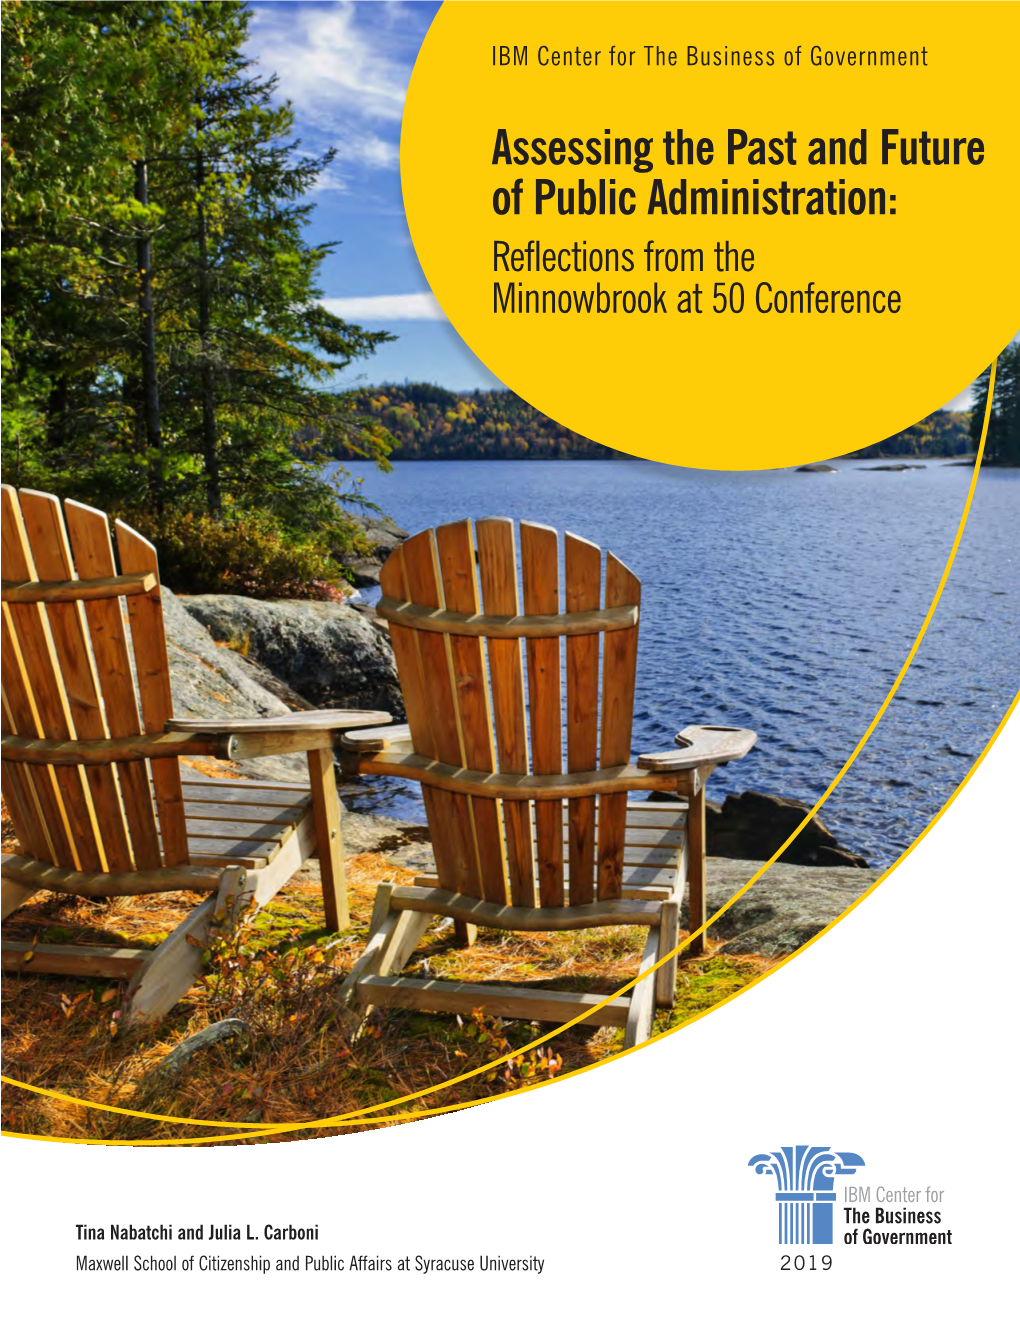 Assessing the Past and Future of Public Administration: Reflections from the Minnowbrook at 50 Conference